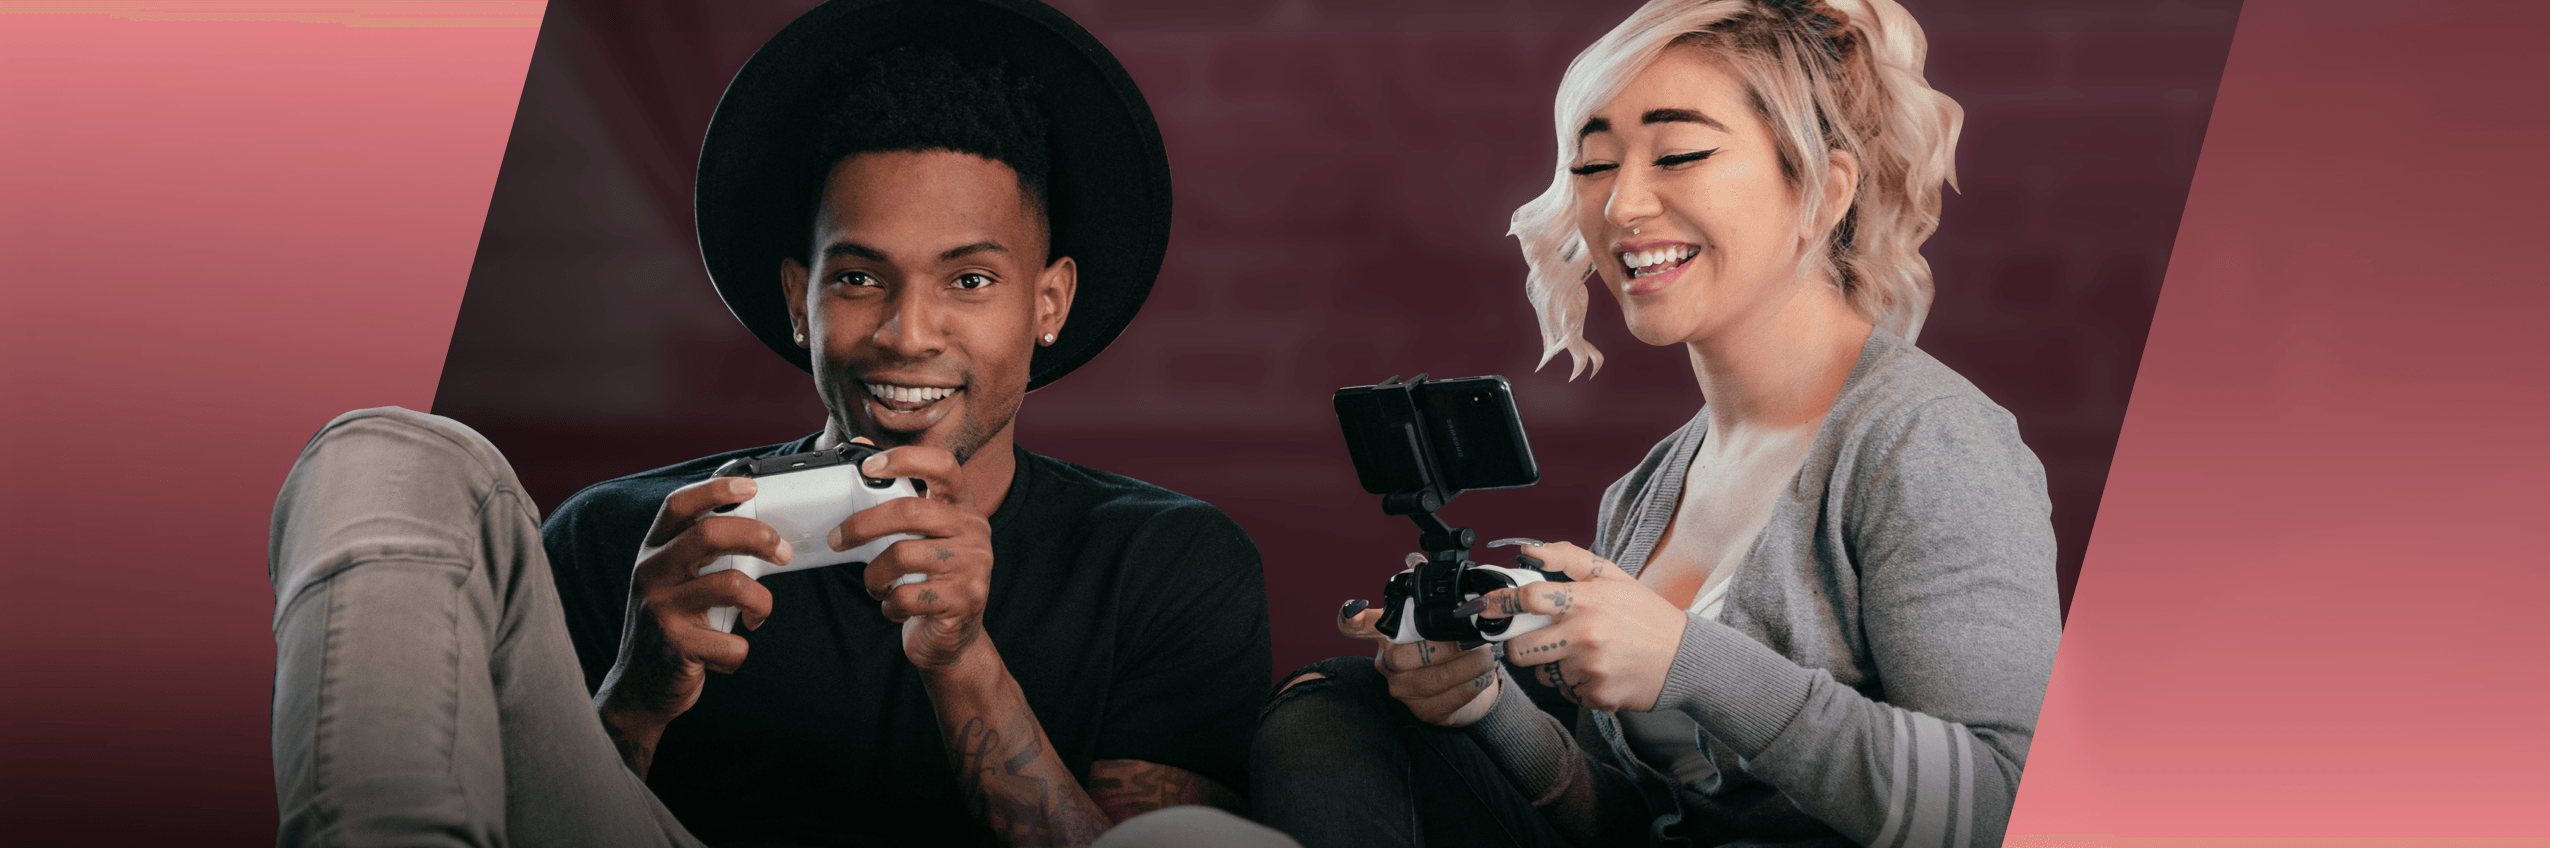 A happy young man plays XBOX while a young woman plays on a mobile phone next to him. 